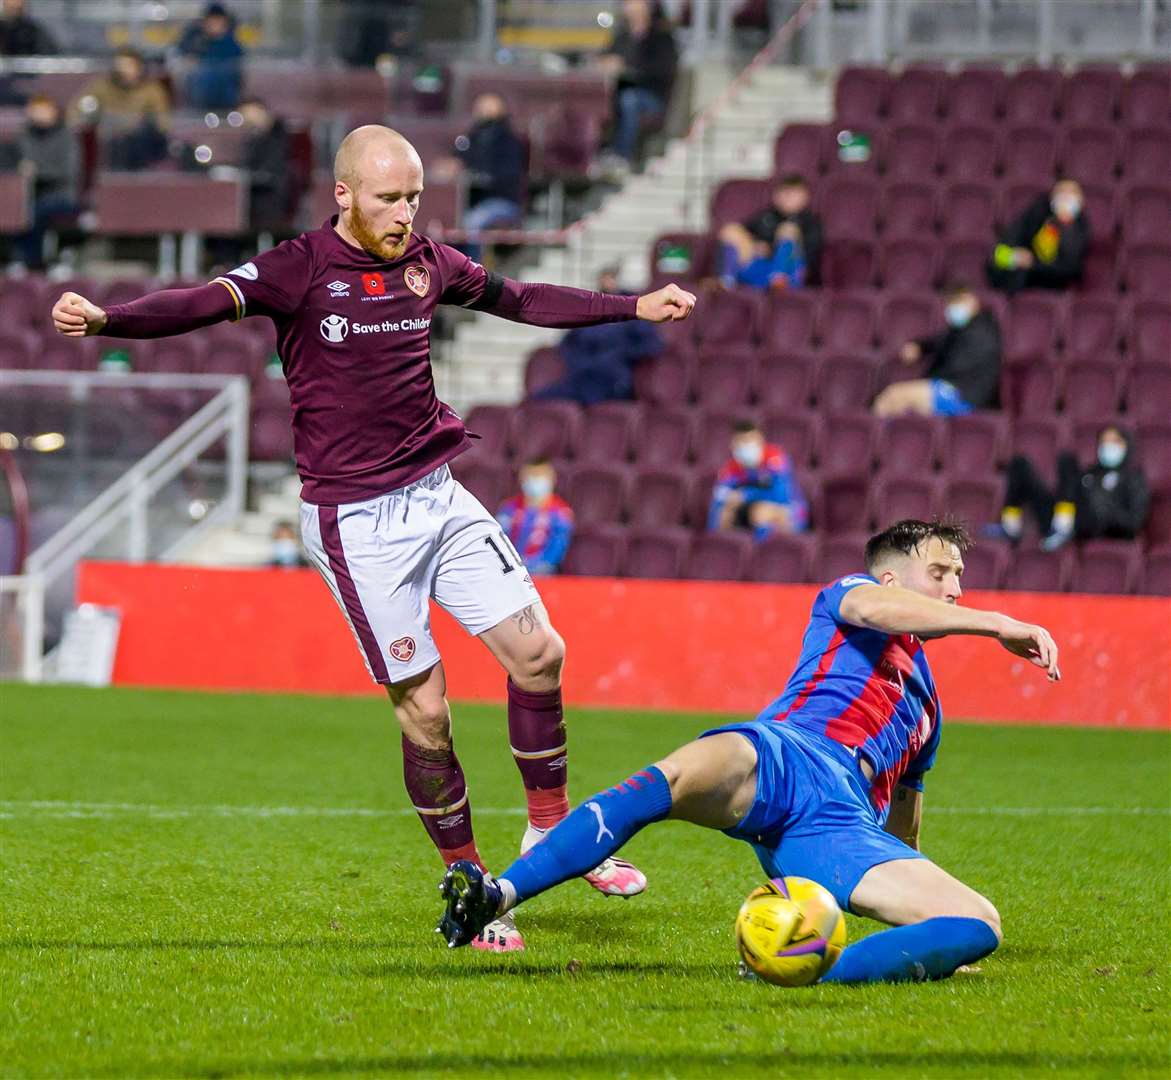 Picture - Ken Macpherson, Inverness. Hearts(2) v Inverness CT(1). 07.11.20. ICT’s Brad McKay blocks a shot from Hearts' Liam Boyce.